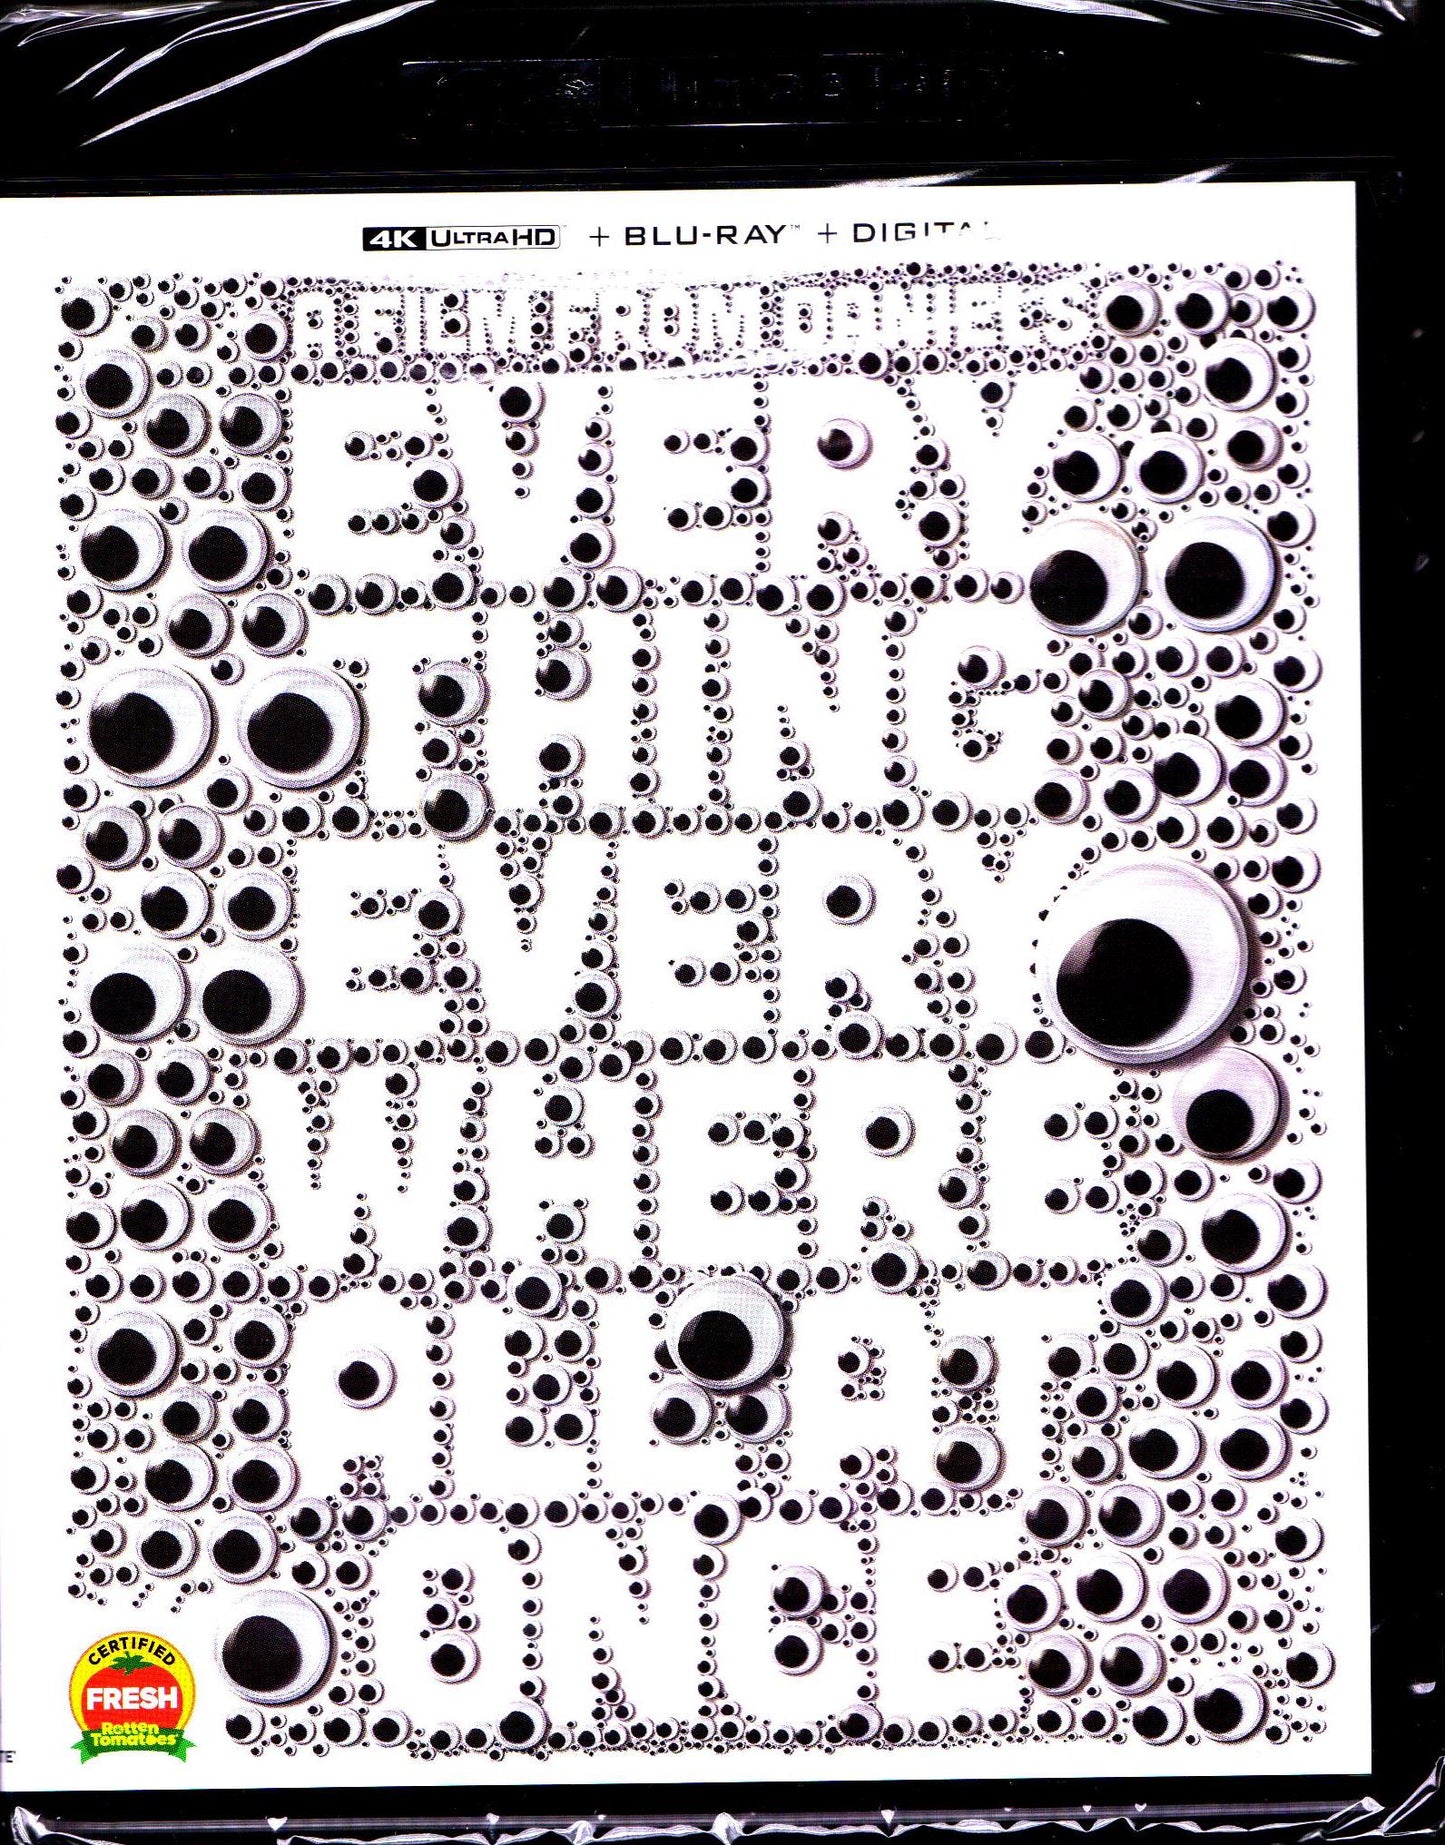 Everything Everywhere All at Once 4K w/ Exclusive Slip (Exclusive)